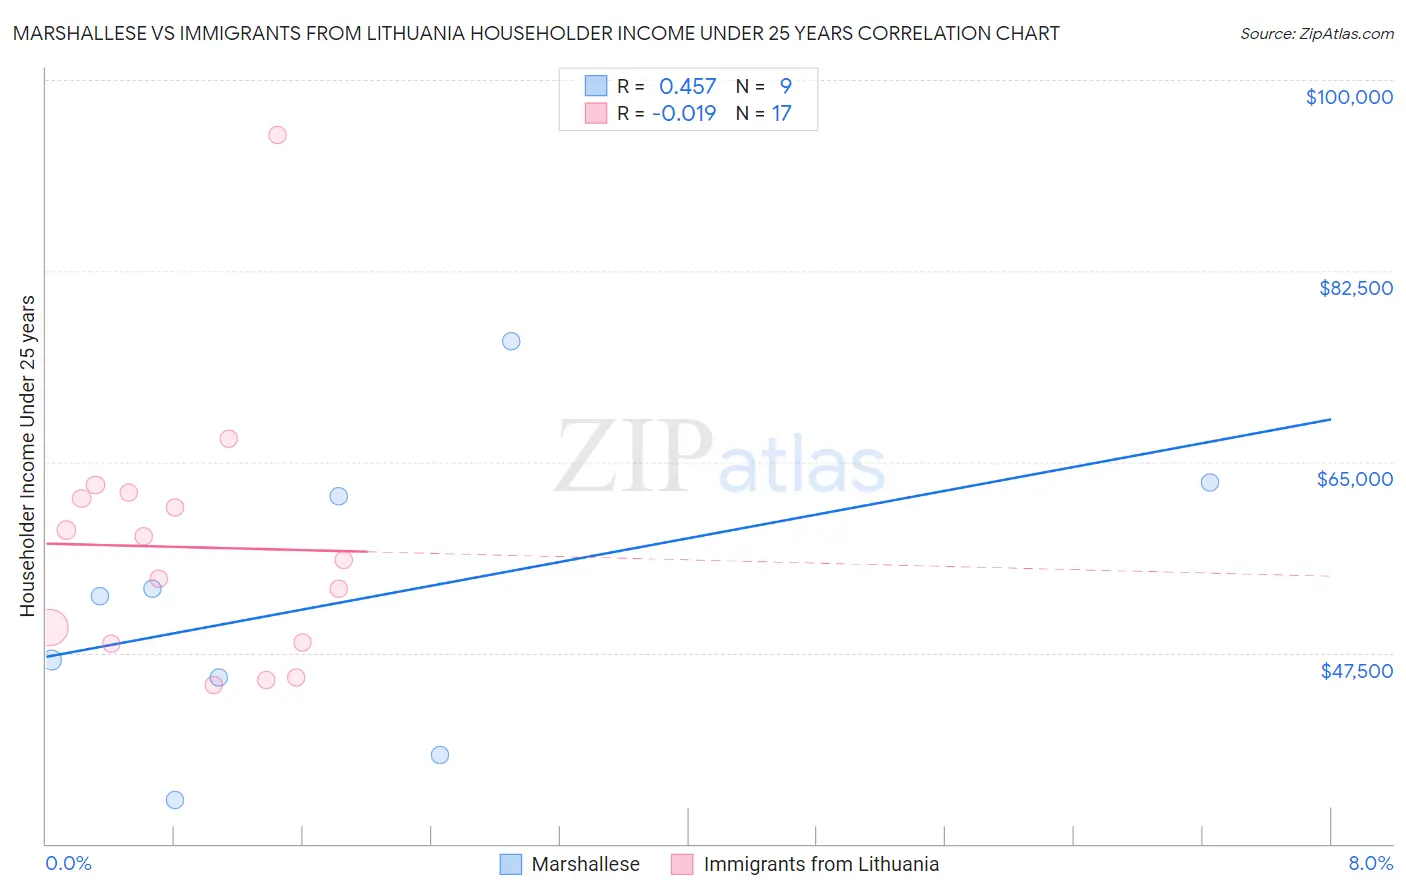 Marshallese vs Immigrants from Lithuania Householder Income Under 25 years